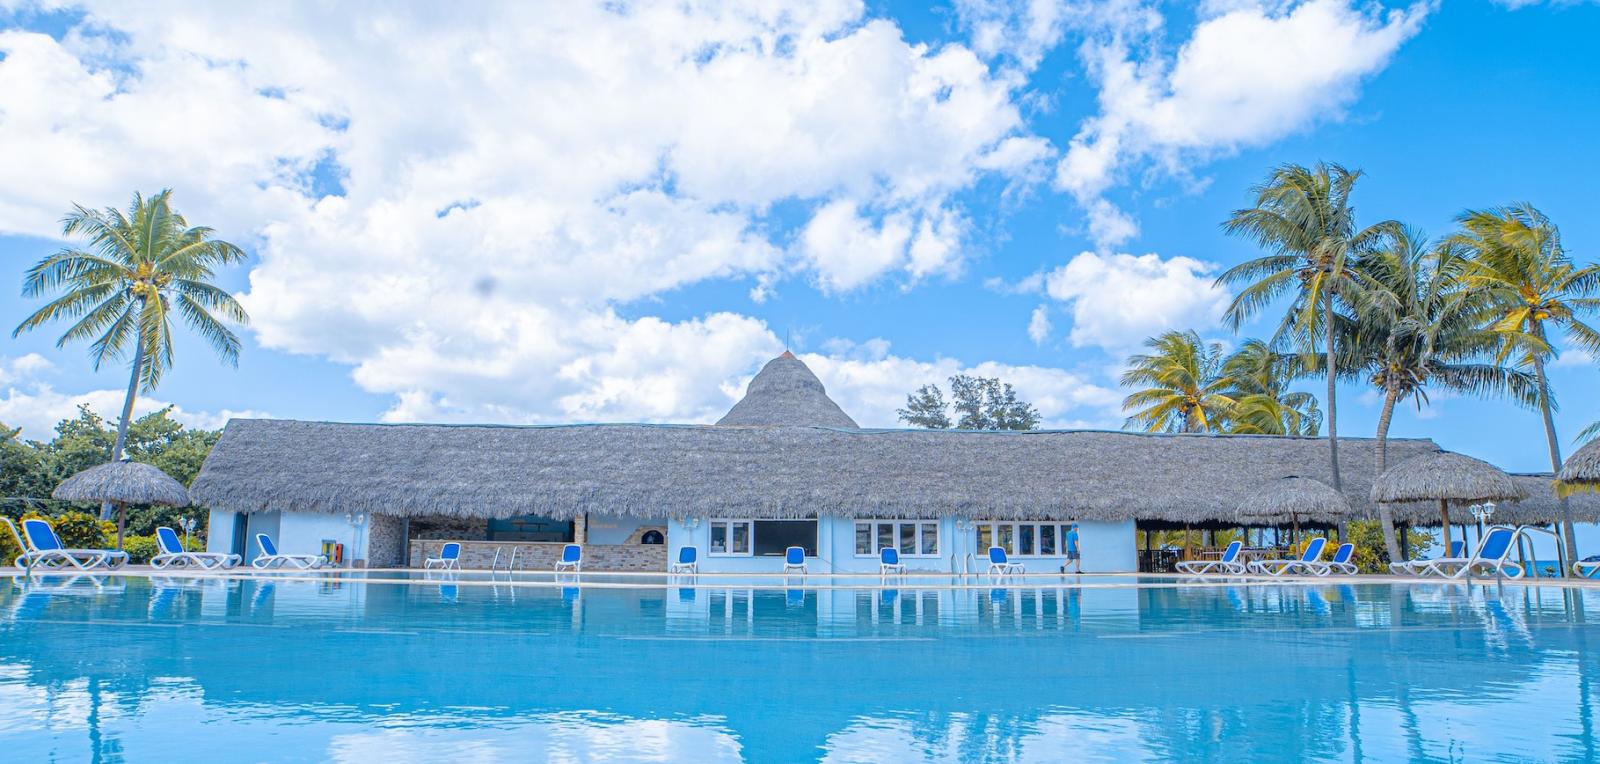 Another Blue Diamond Resorts hotel will operate in Cuba